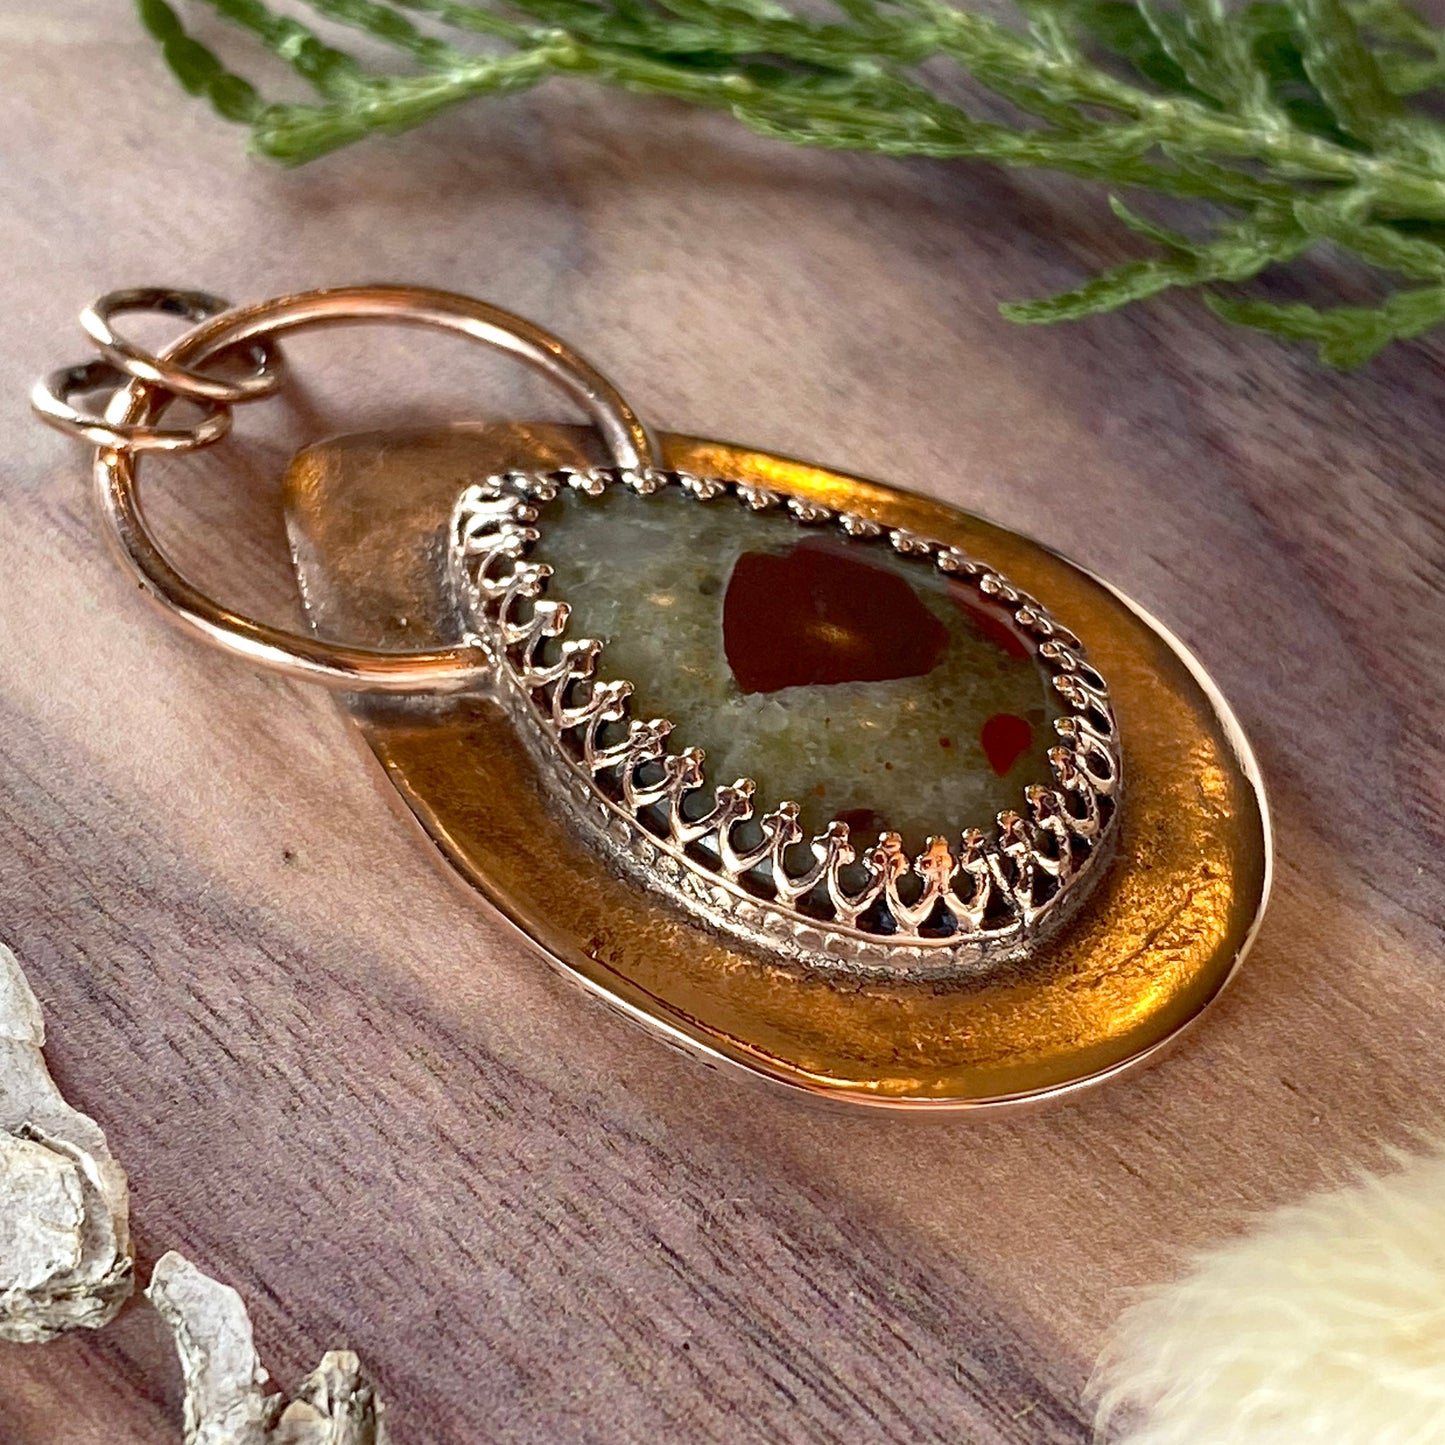 Puddingstone Pendant Front View III - Stone Treasures by the Lake